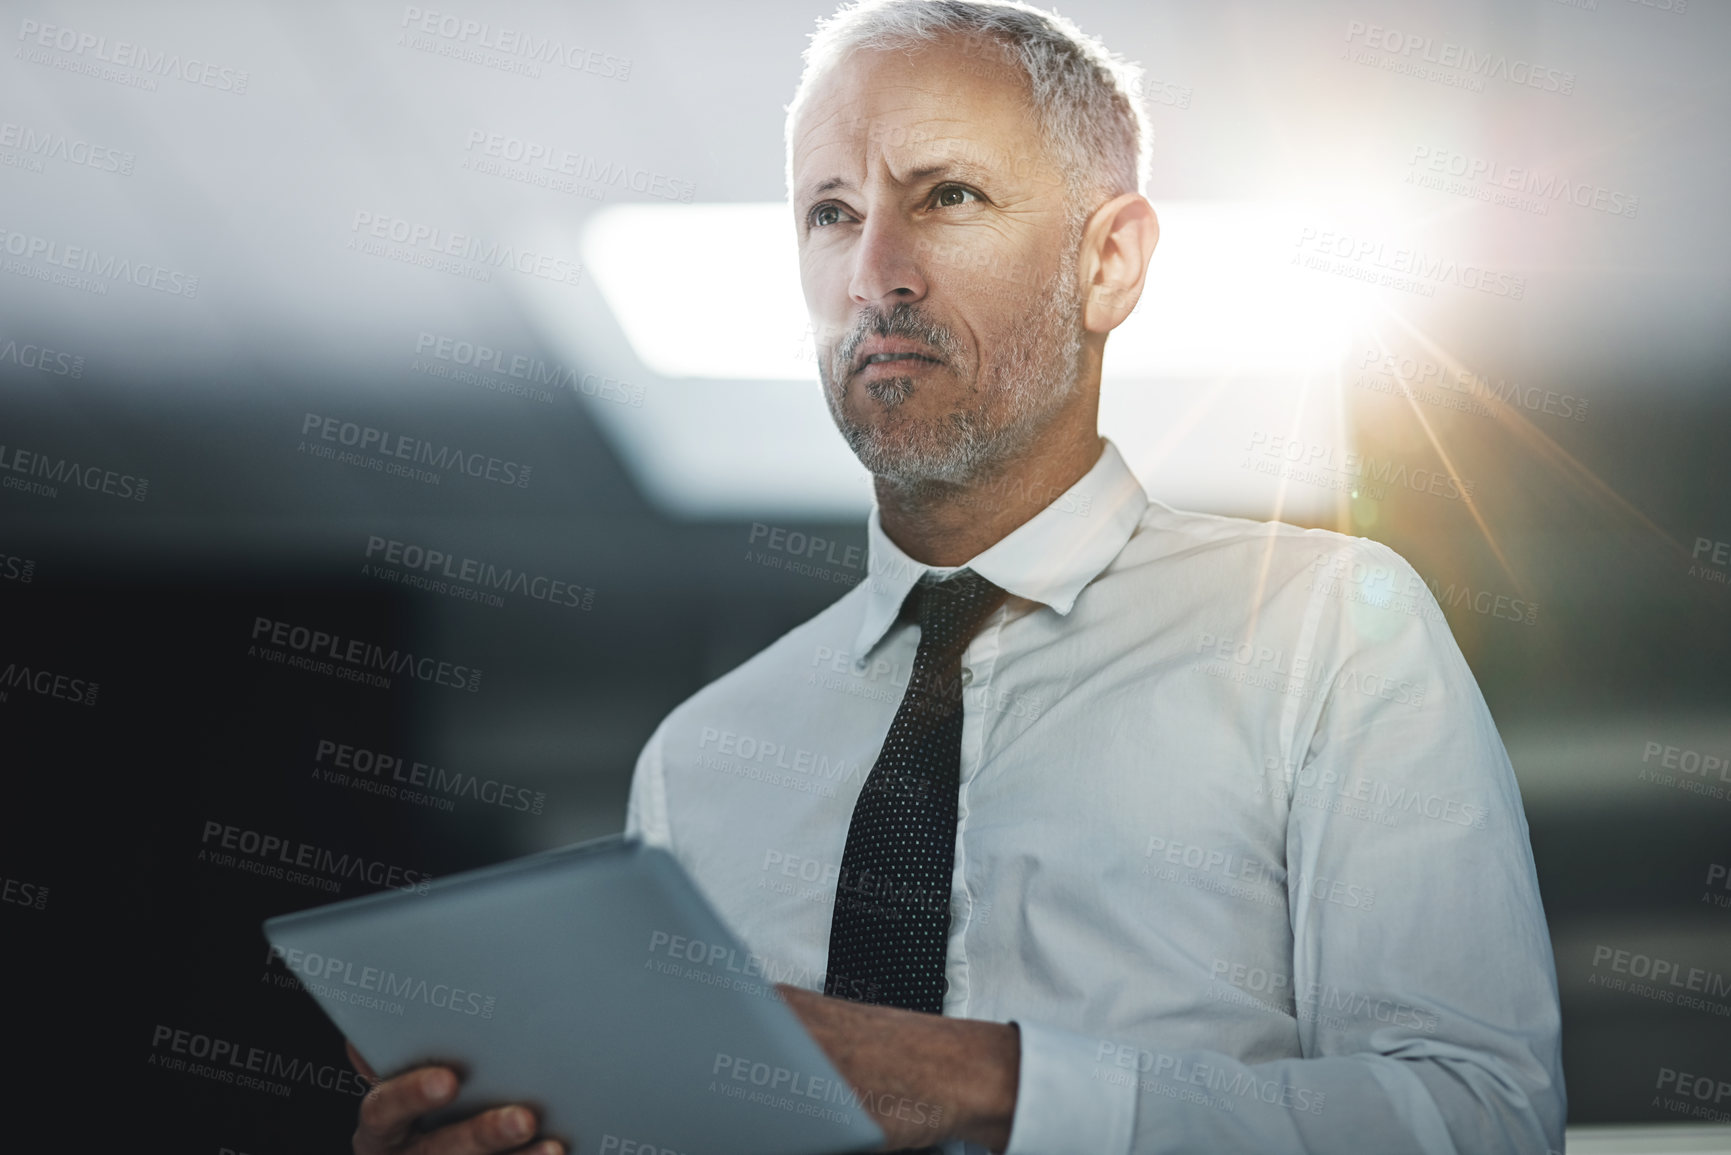 Buy stock photo Shot of a businessman standing in an office using a digital tablet